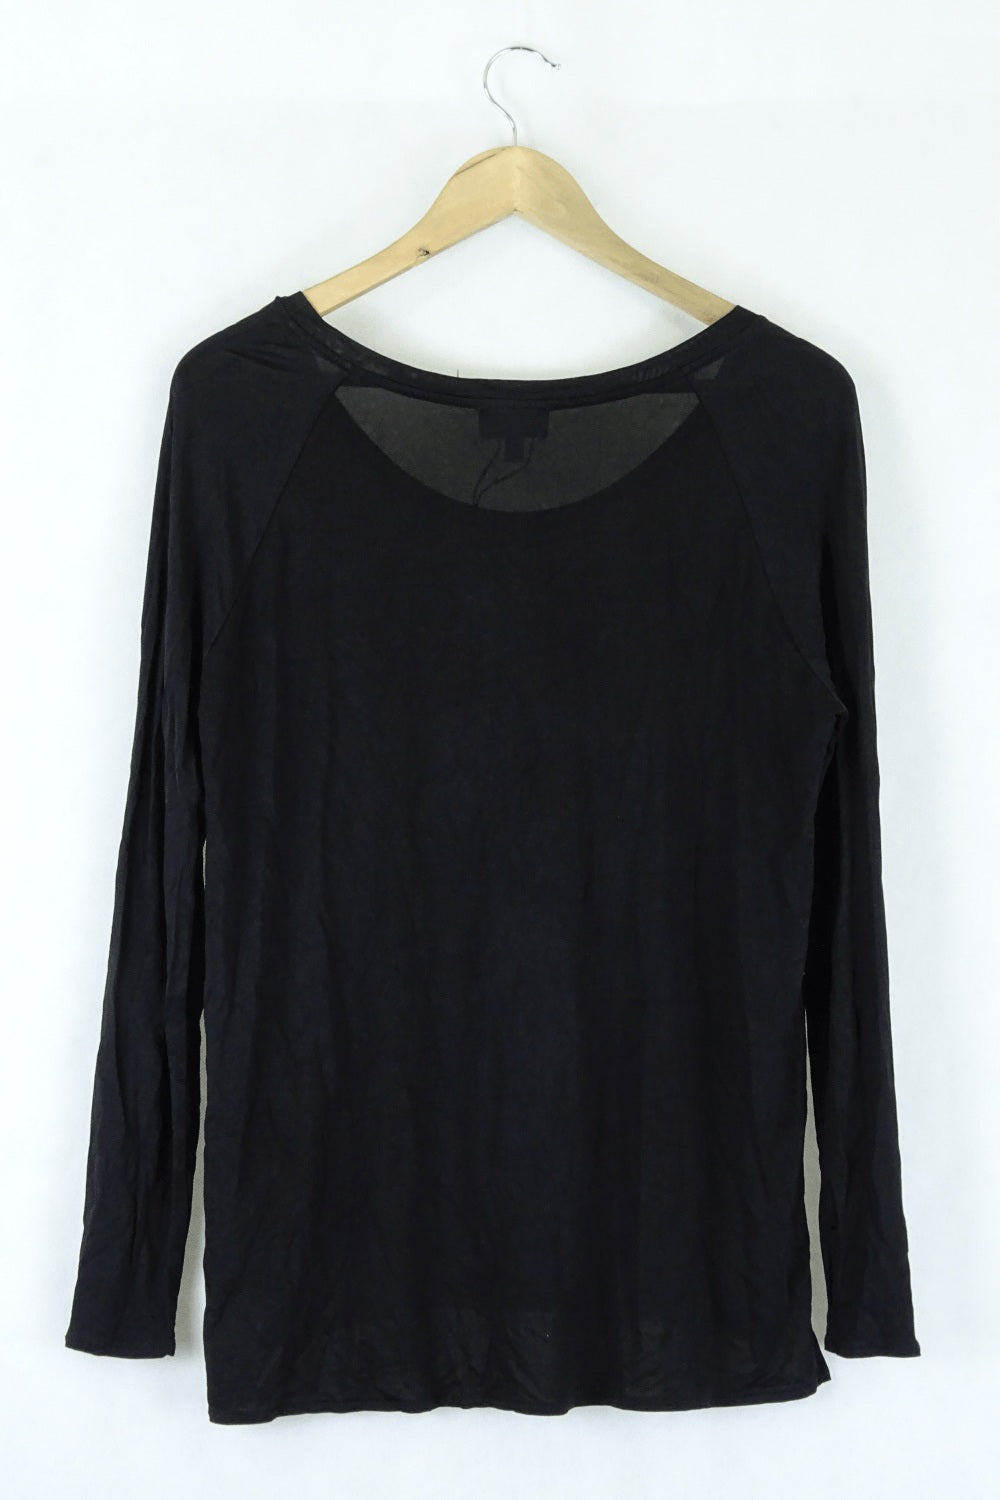 Witchery Black Long Sleeve Top XS